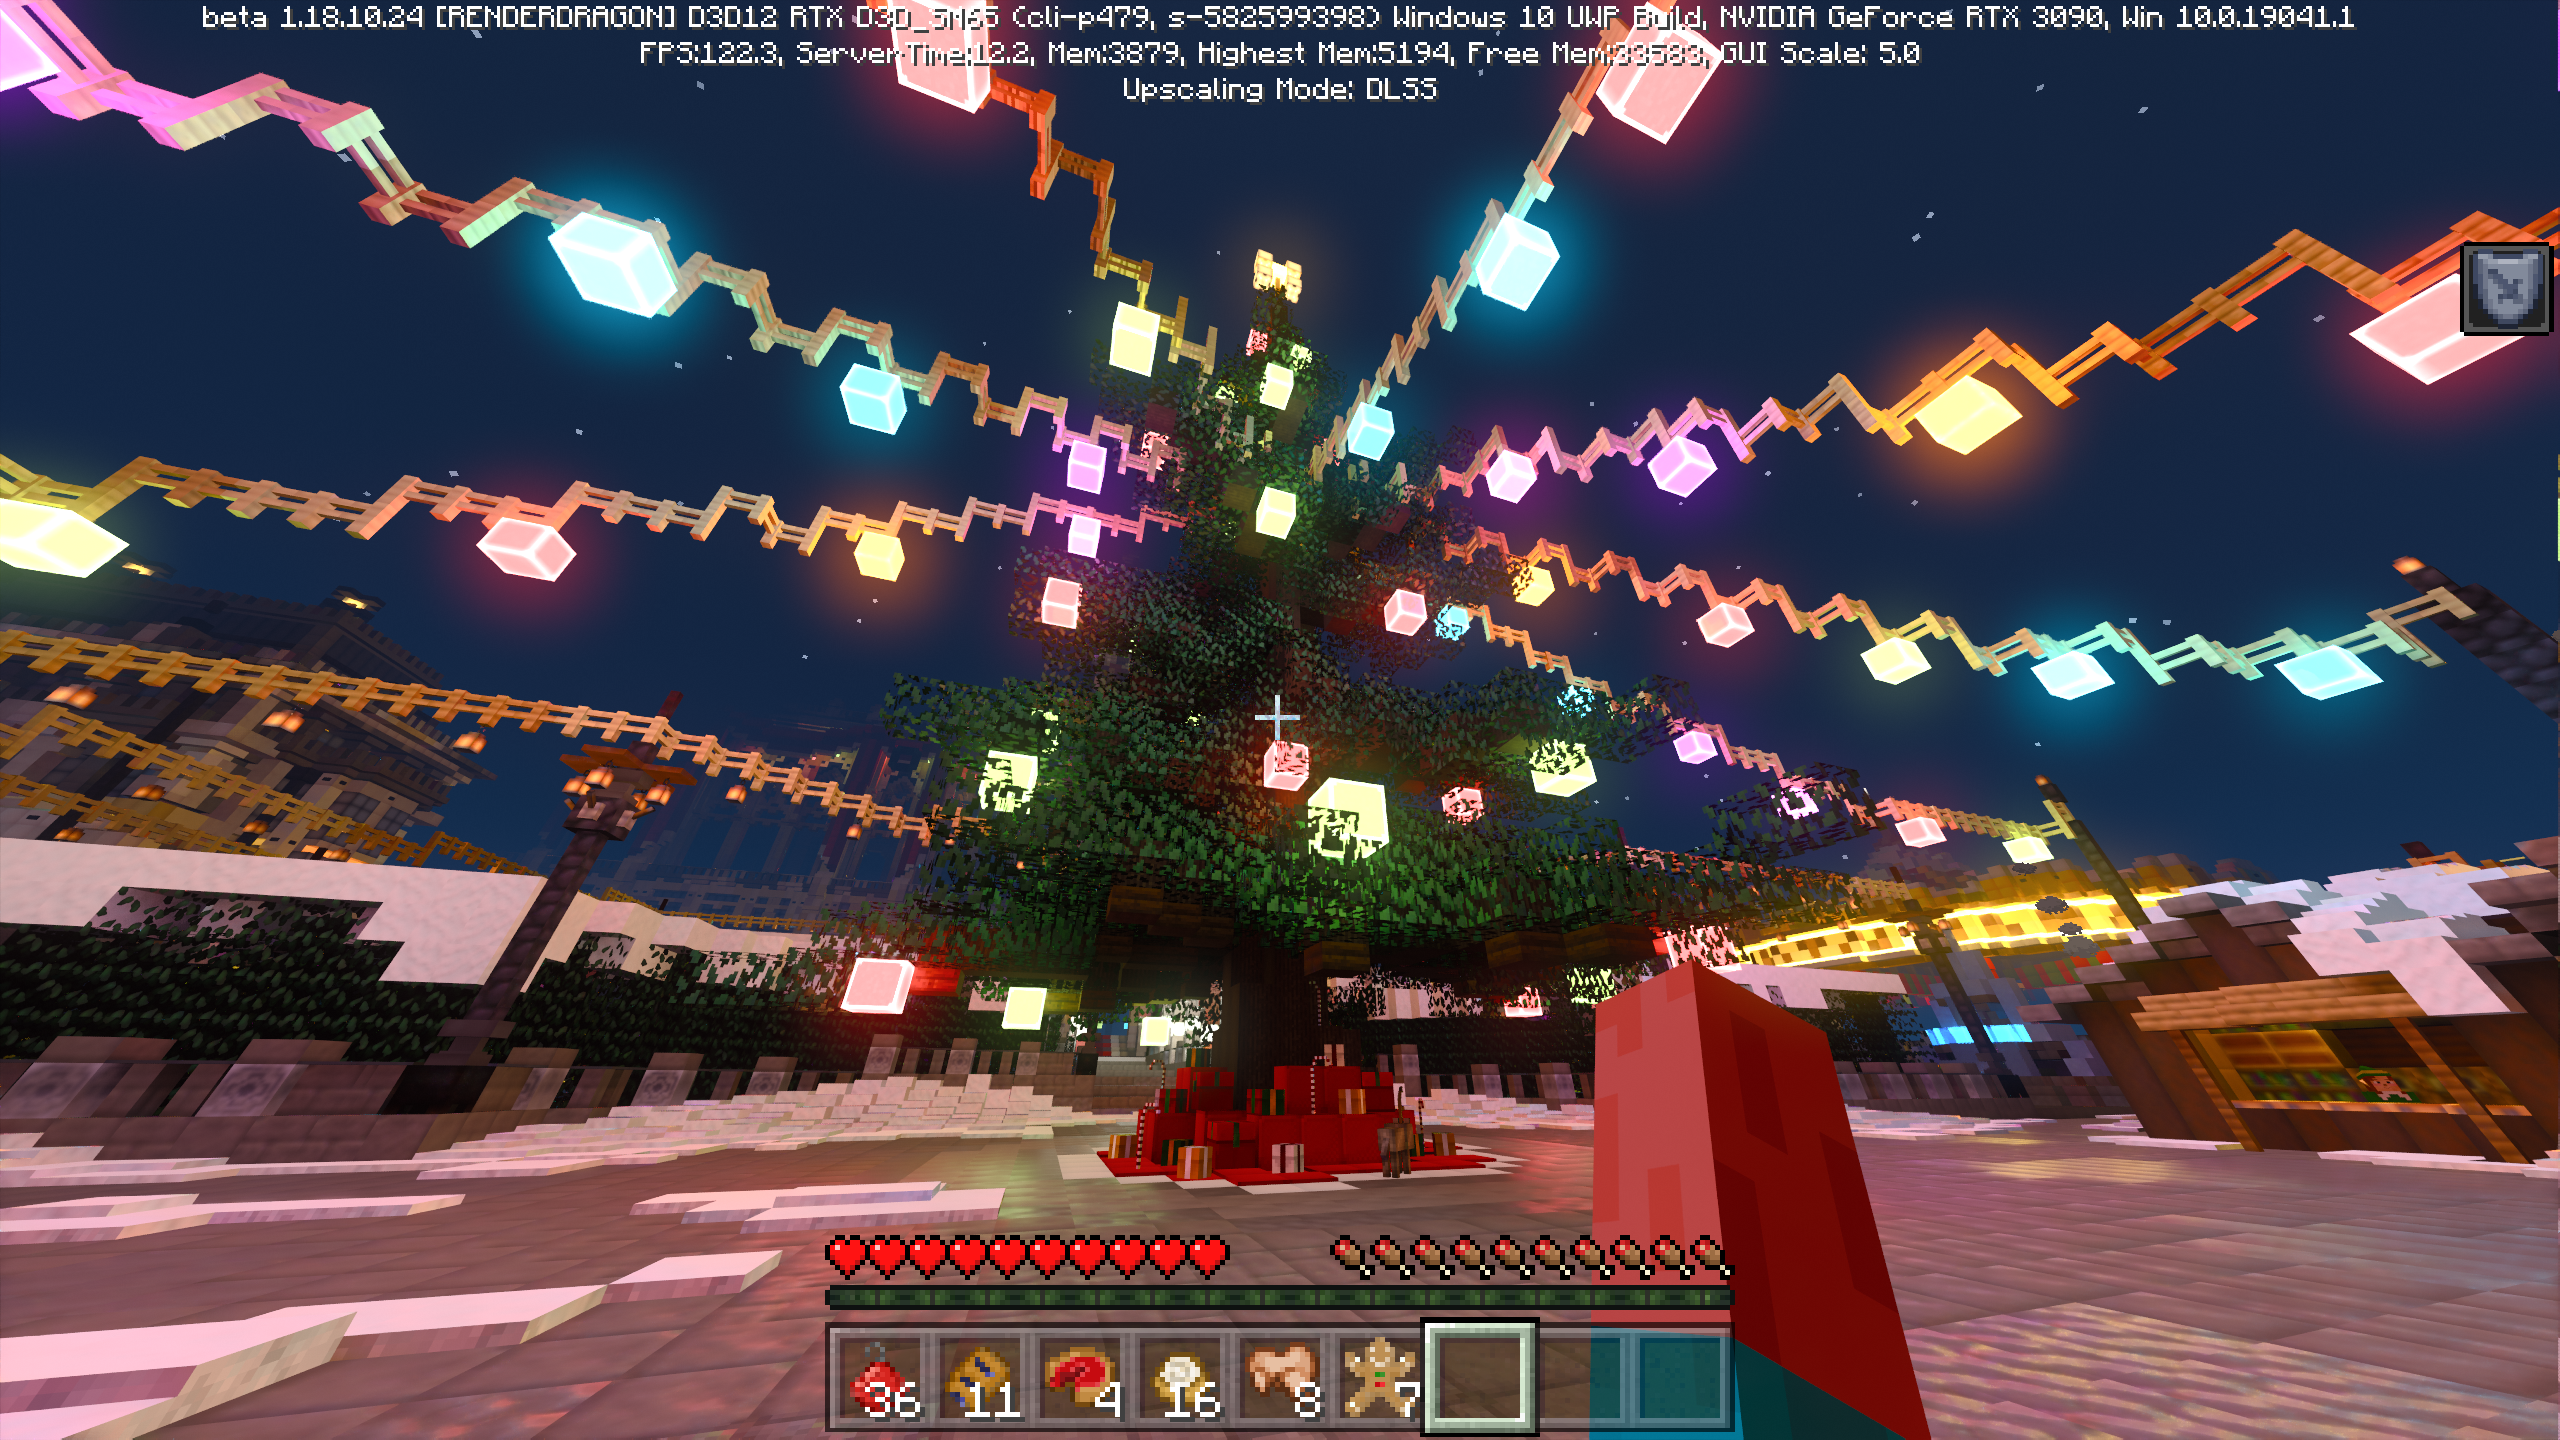 A giant Christmas tree, complete with lights and presents, in Nvidia's Minecraft RTX Winter World map.